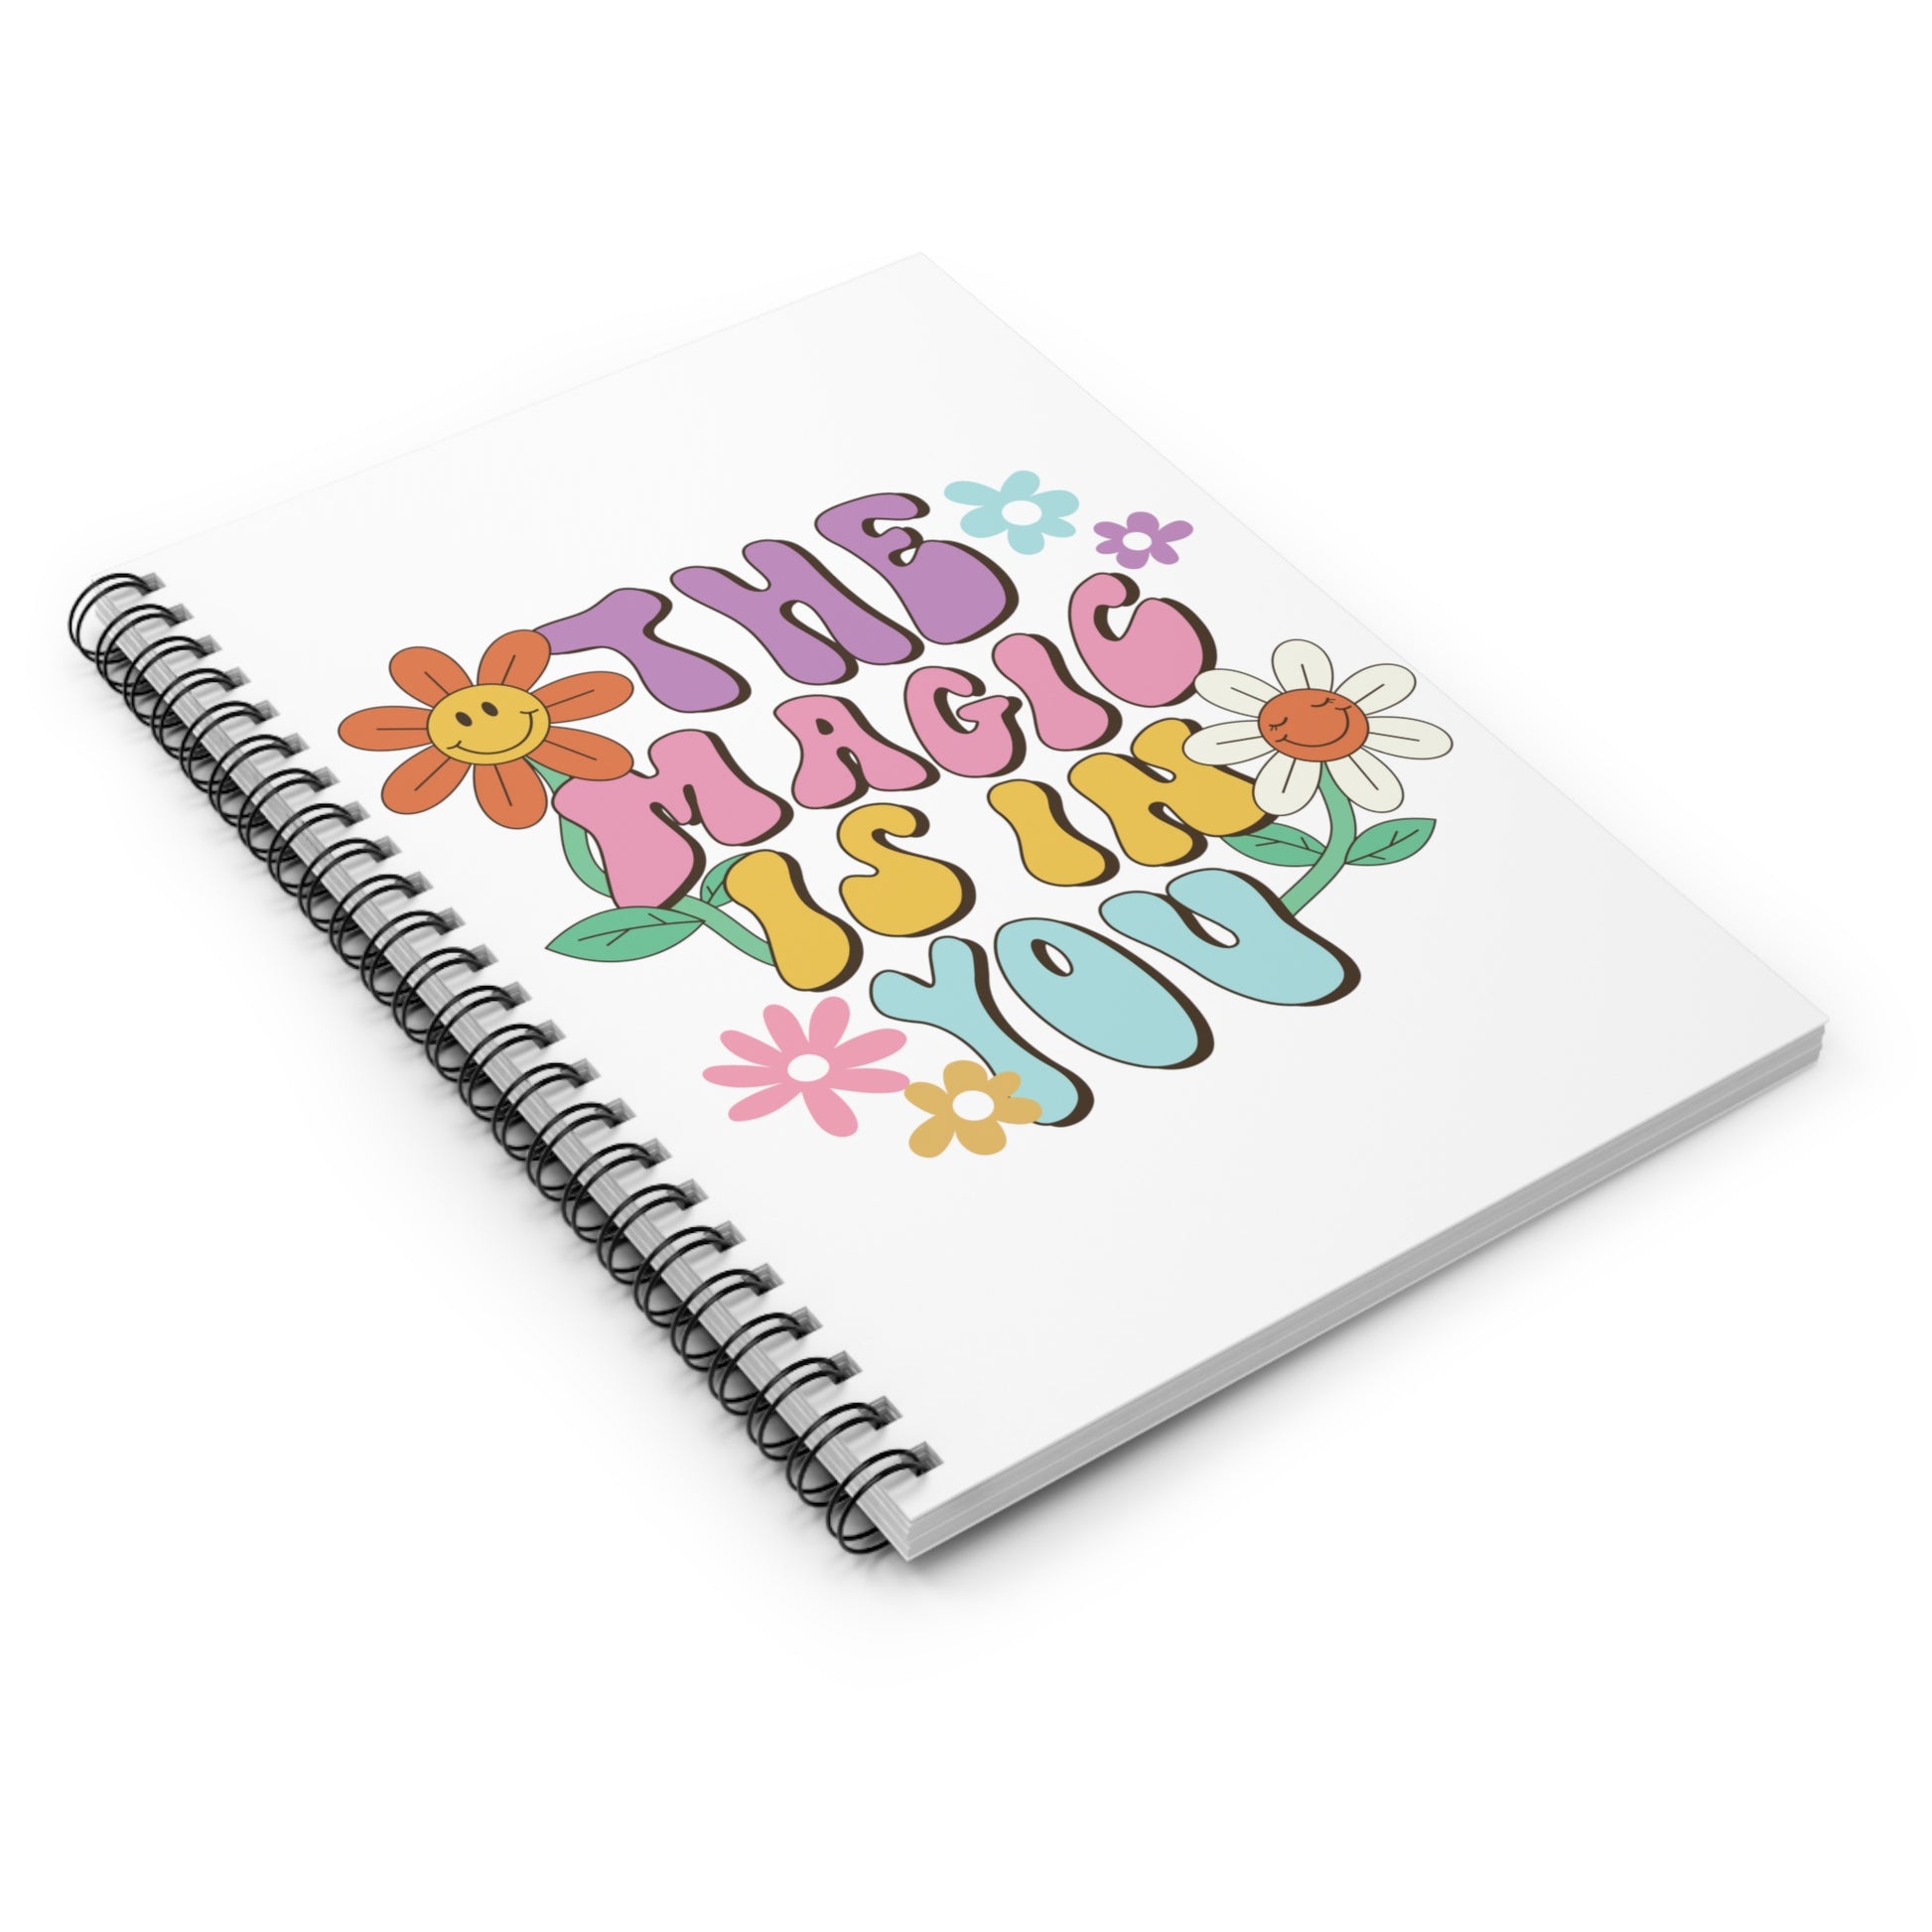 The Magic is in You: Spiral Notebook - Log Books - Journals - Diaries - and More Custom Printed by TheGlassyLass